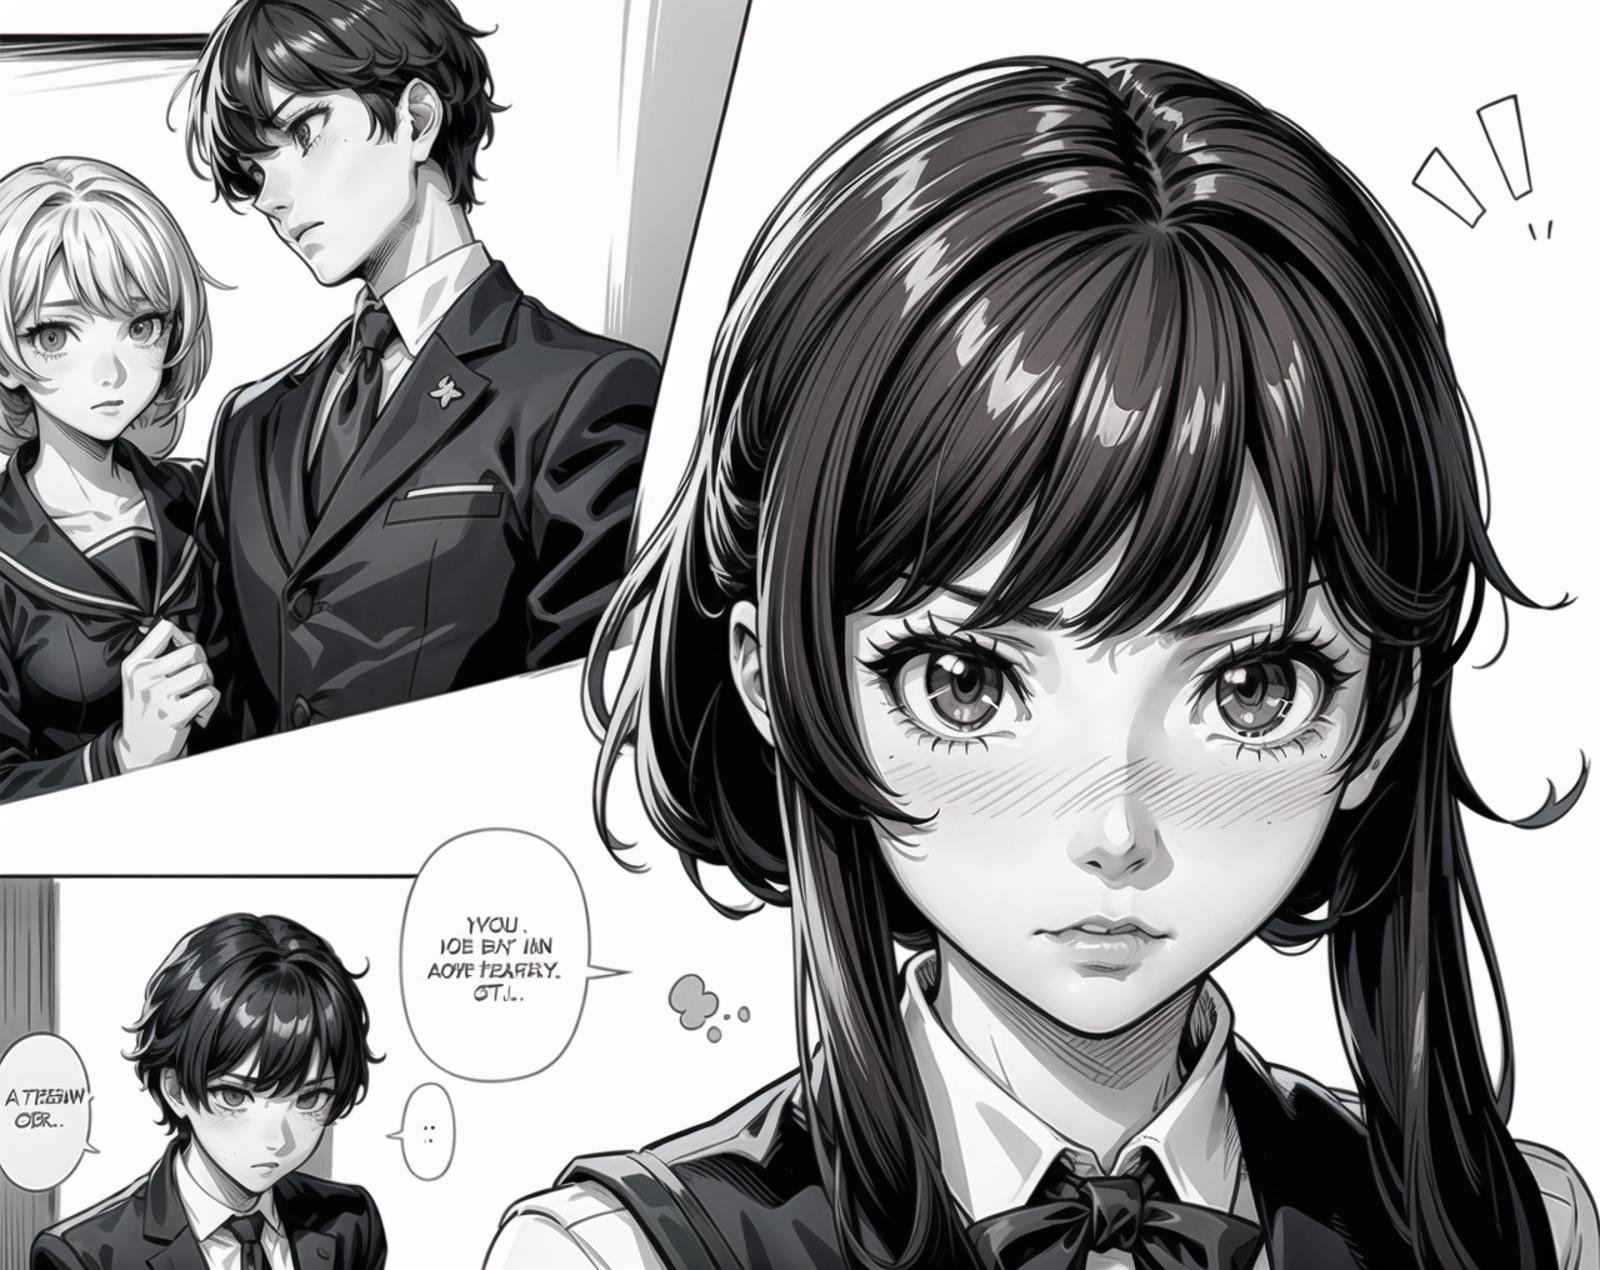 A manga comic featuring a girl with a bow in her hair and a man in a suit.